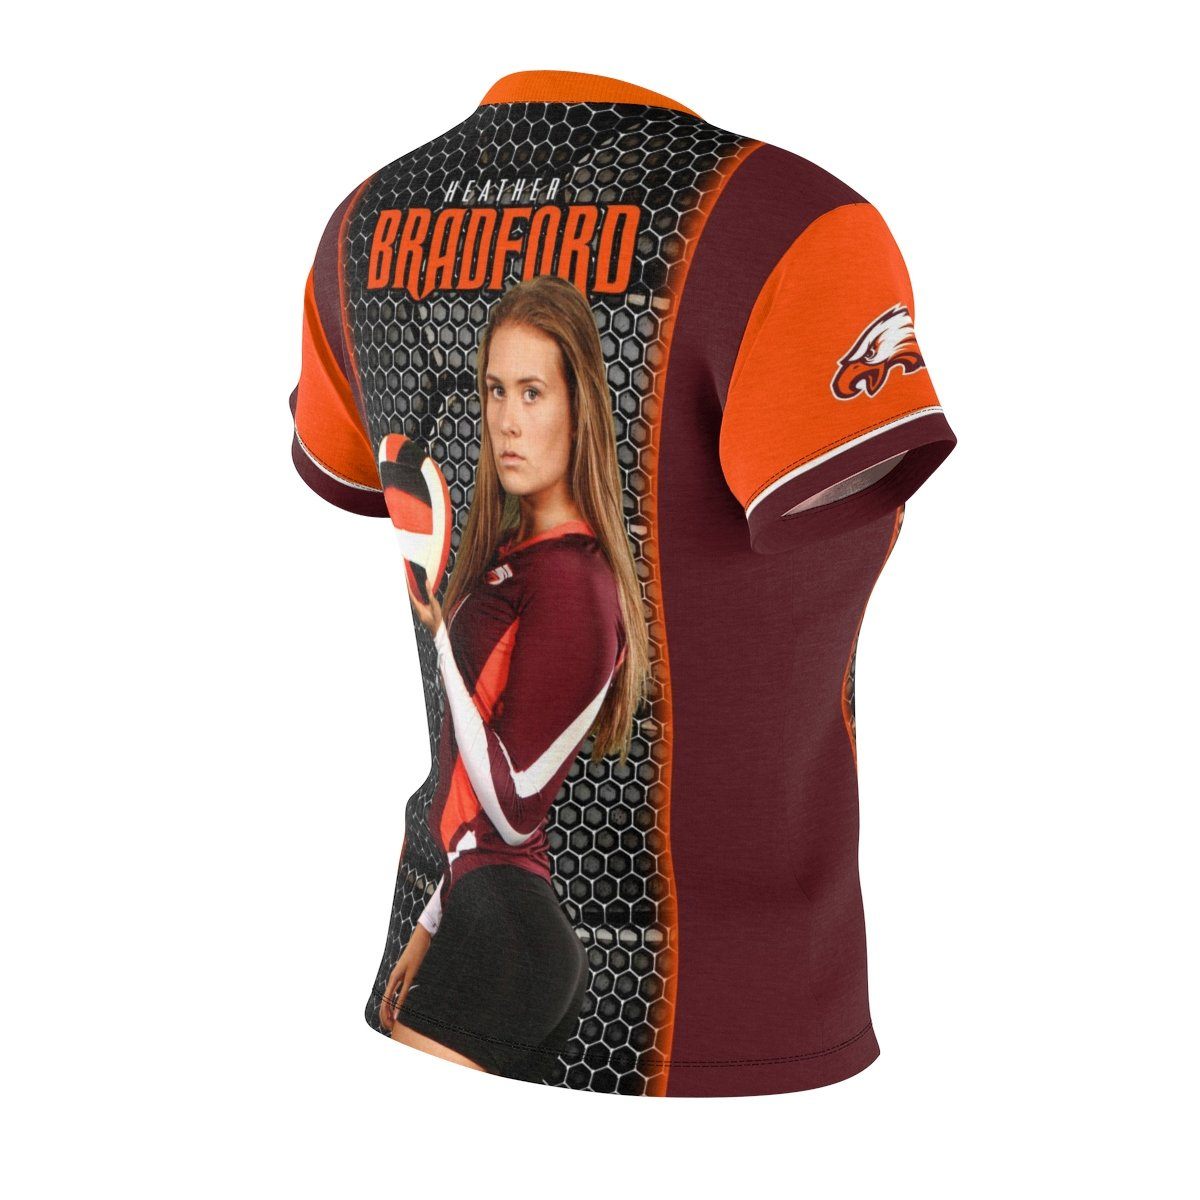 Honeycomb - V.1 - Extreme Sportswear Women's Cut & Sew Template-Photoshop Template - Photo Solutions